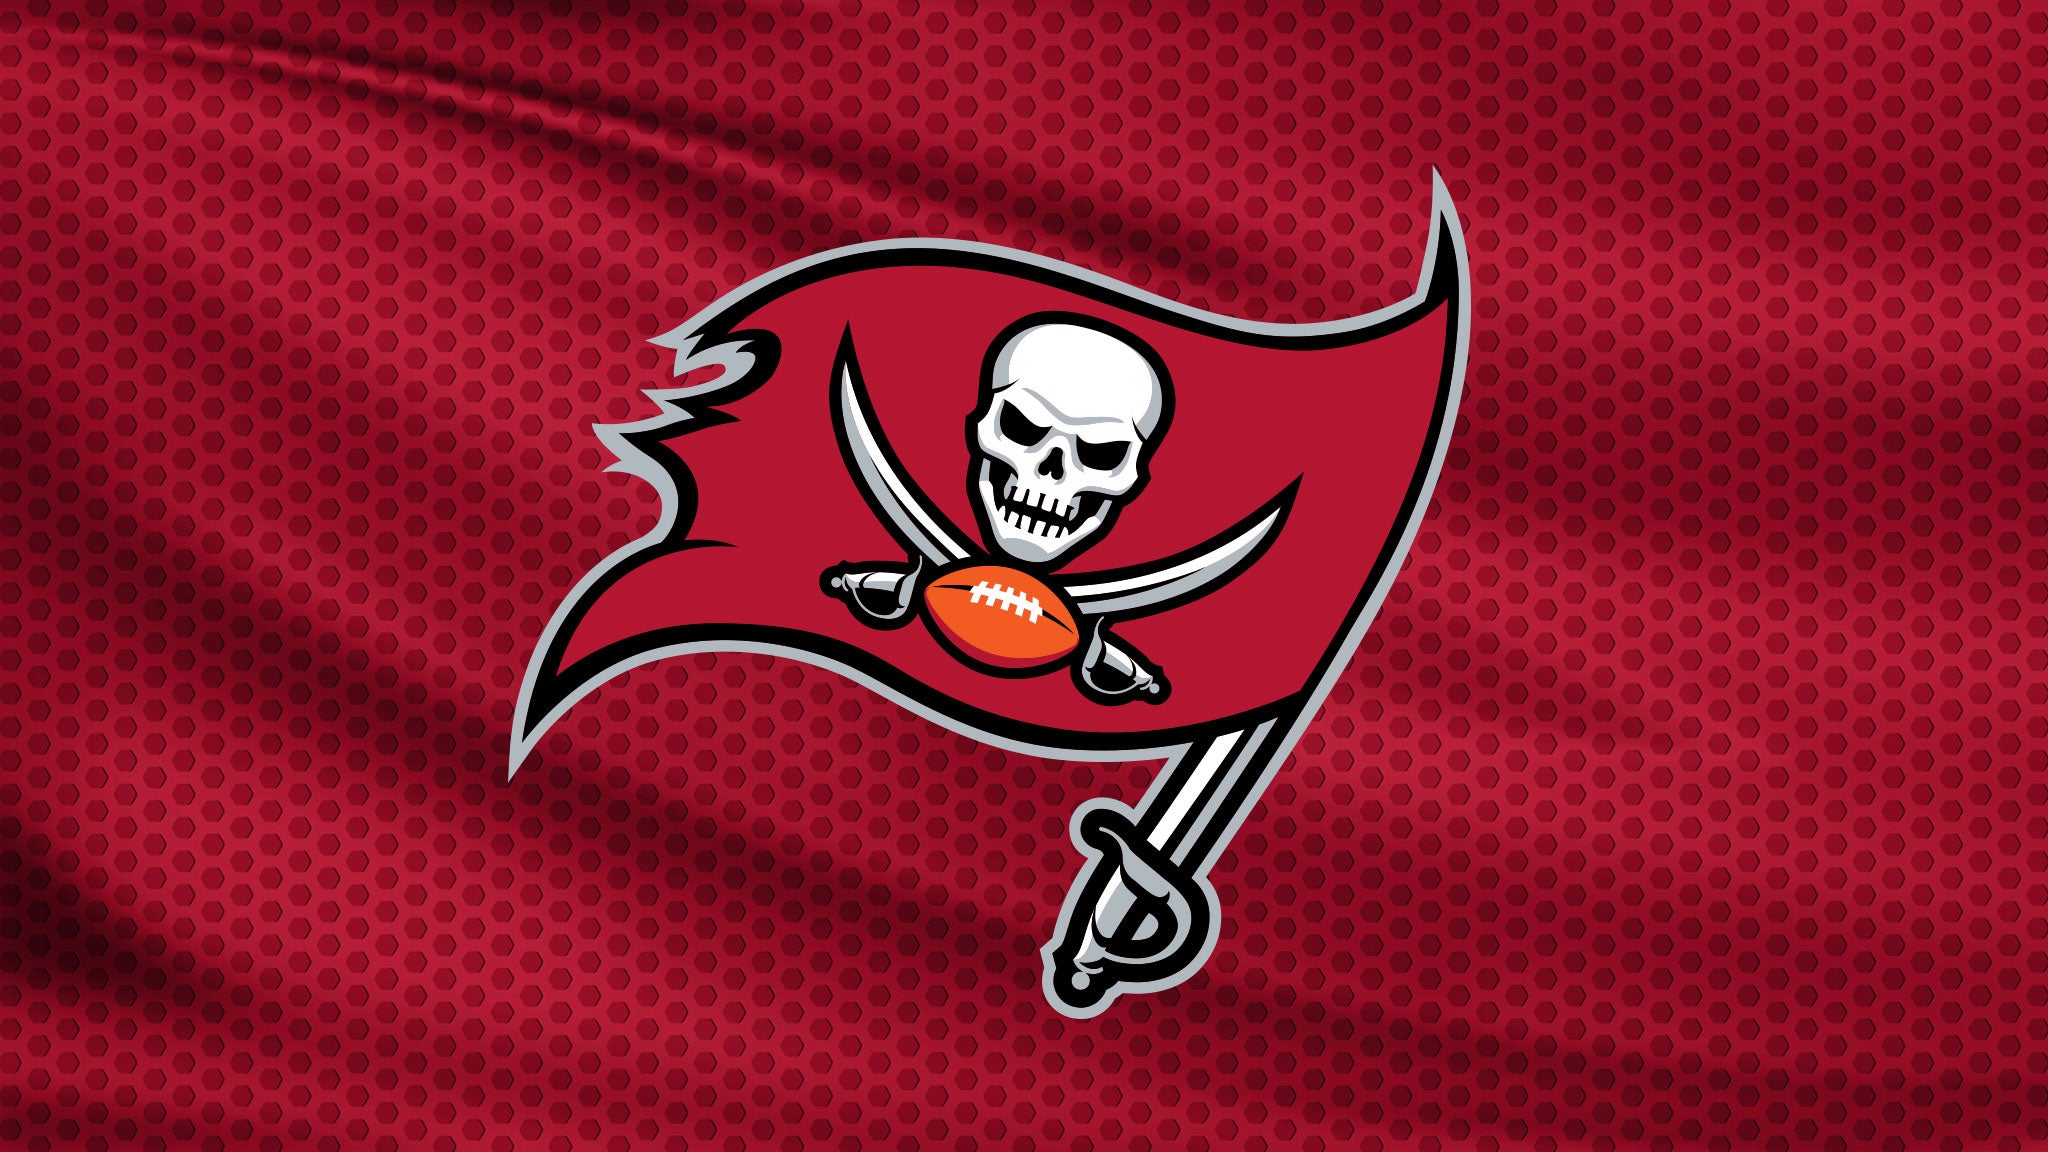 Tampa Bay Buccaneers v TBD - NFC in Tampa promo photo for Resale presale offer code